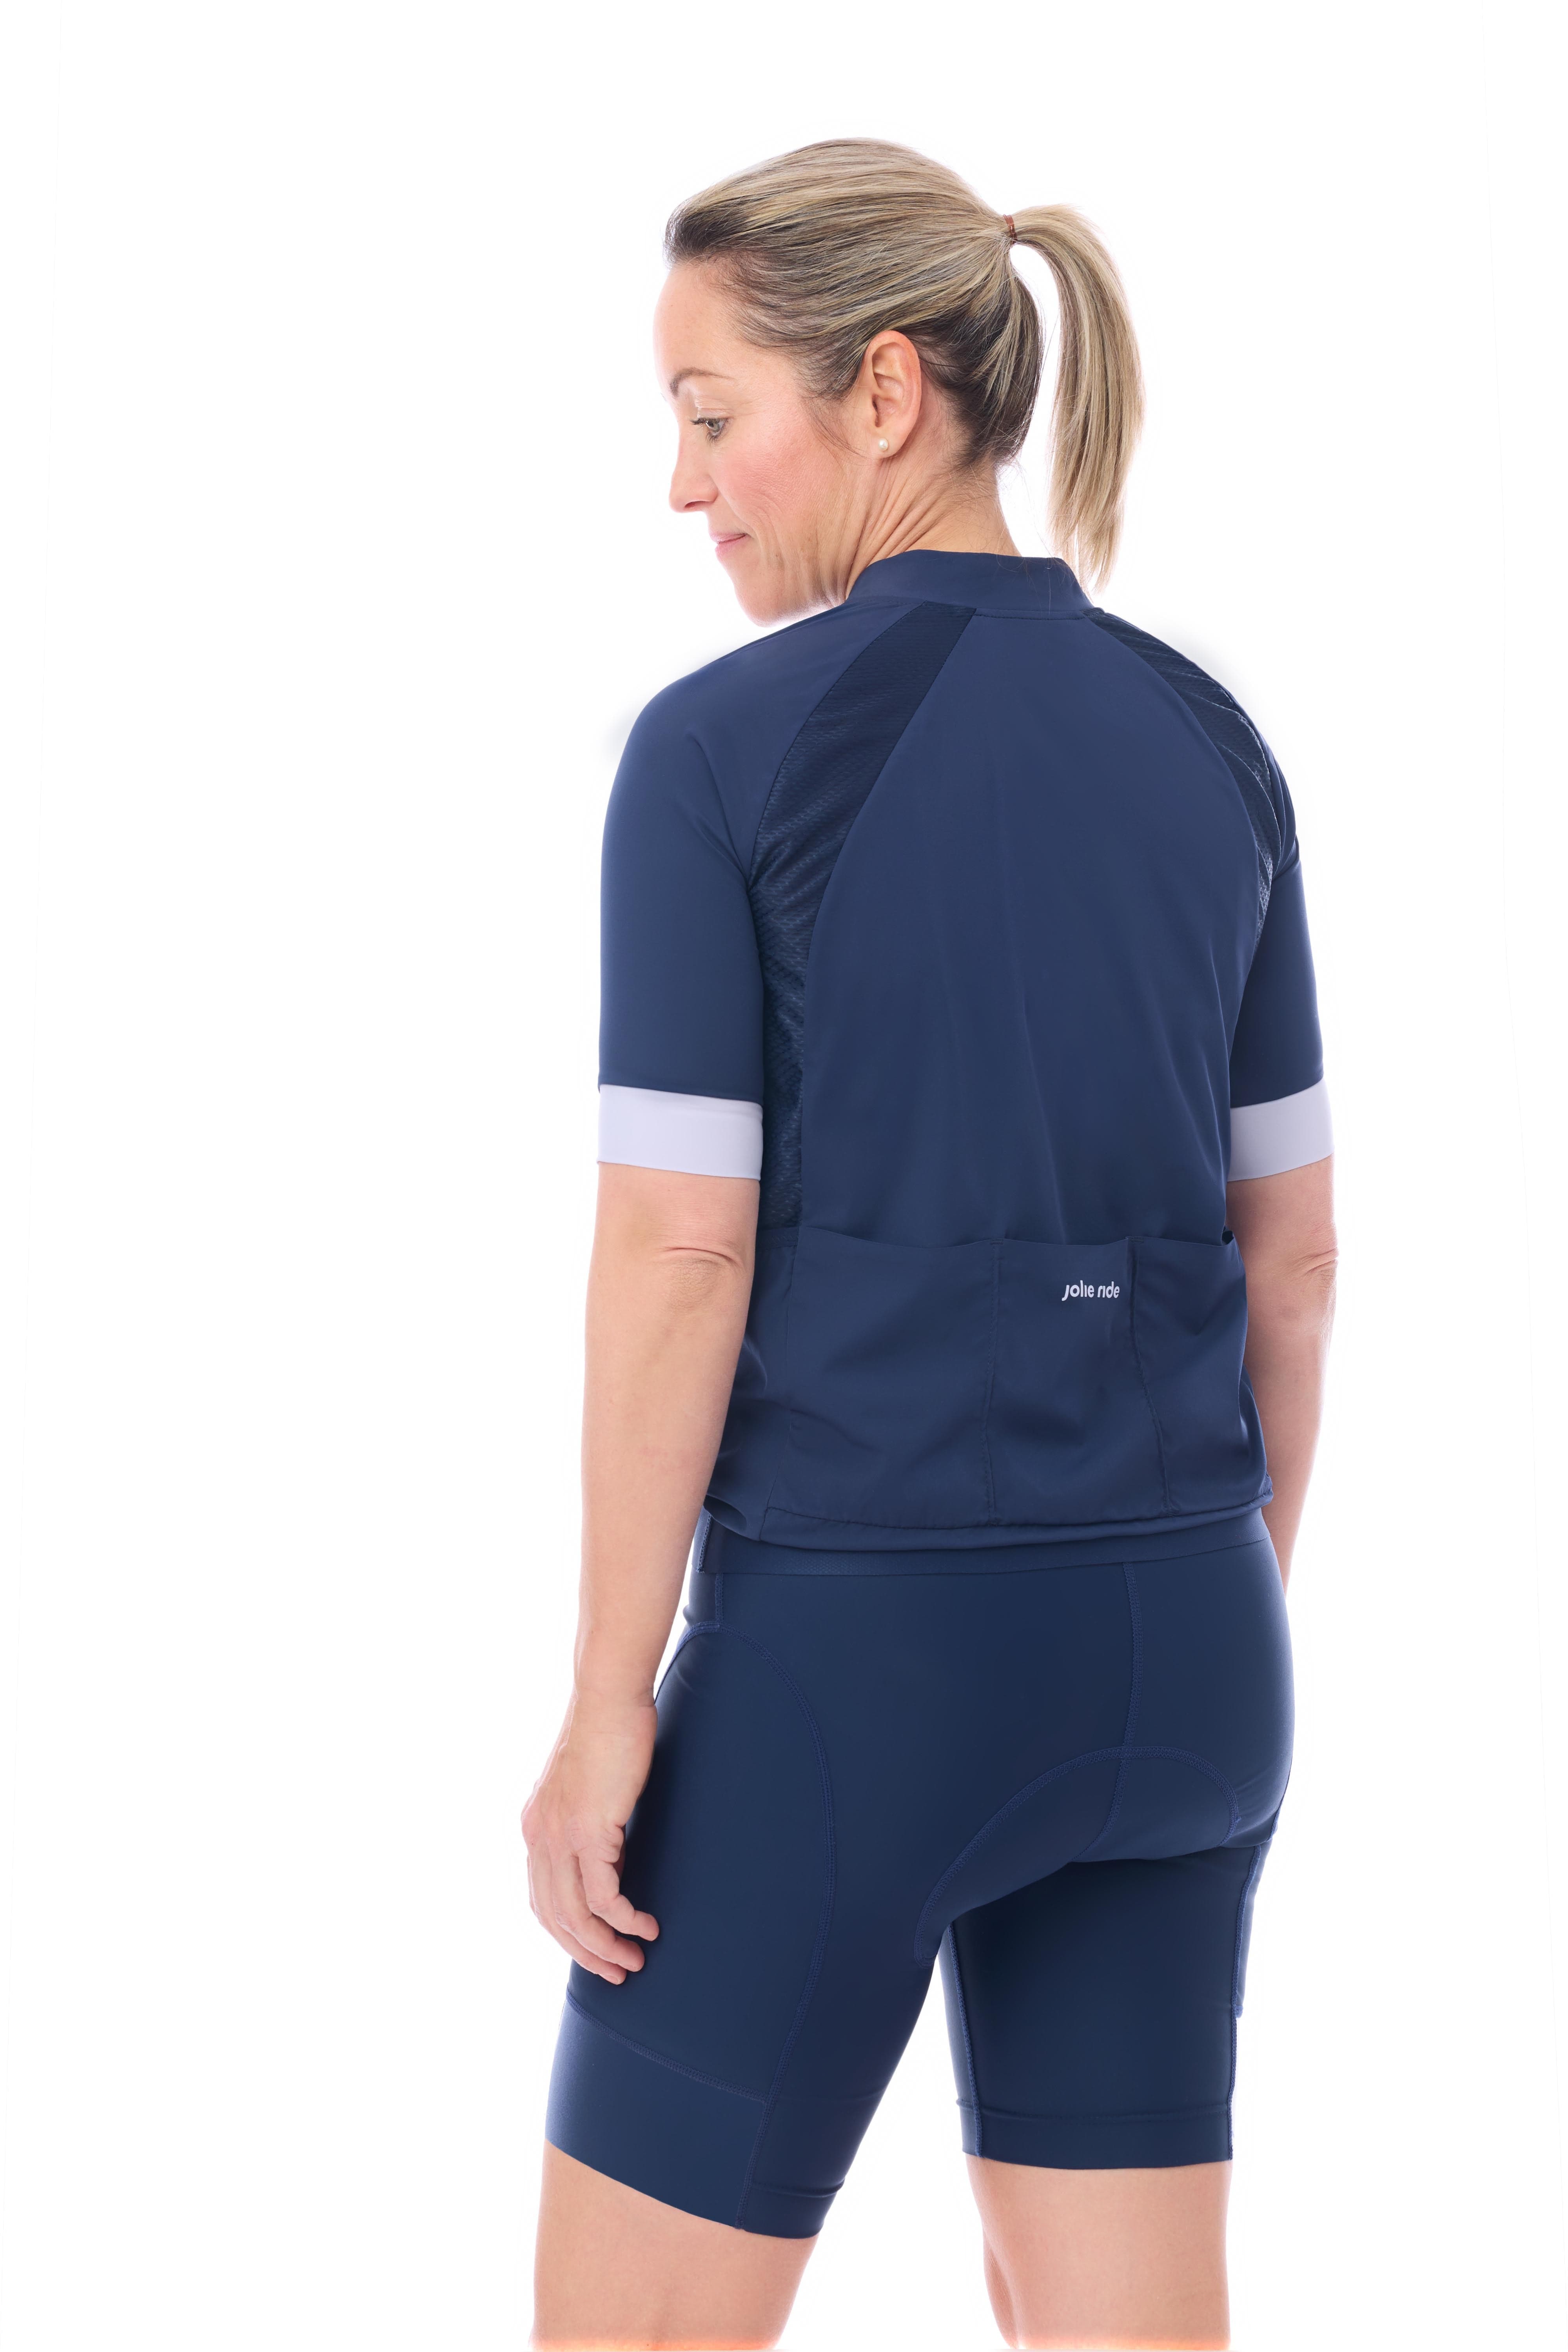 JolieRide Jersey loose fit cycling jersey with UV protection and storage pockets